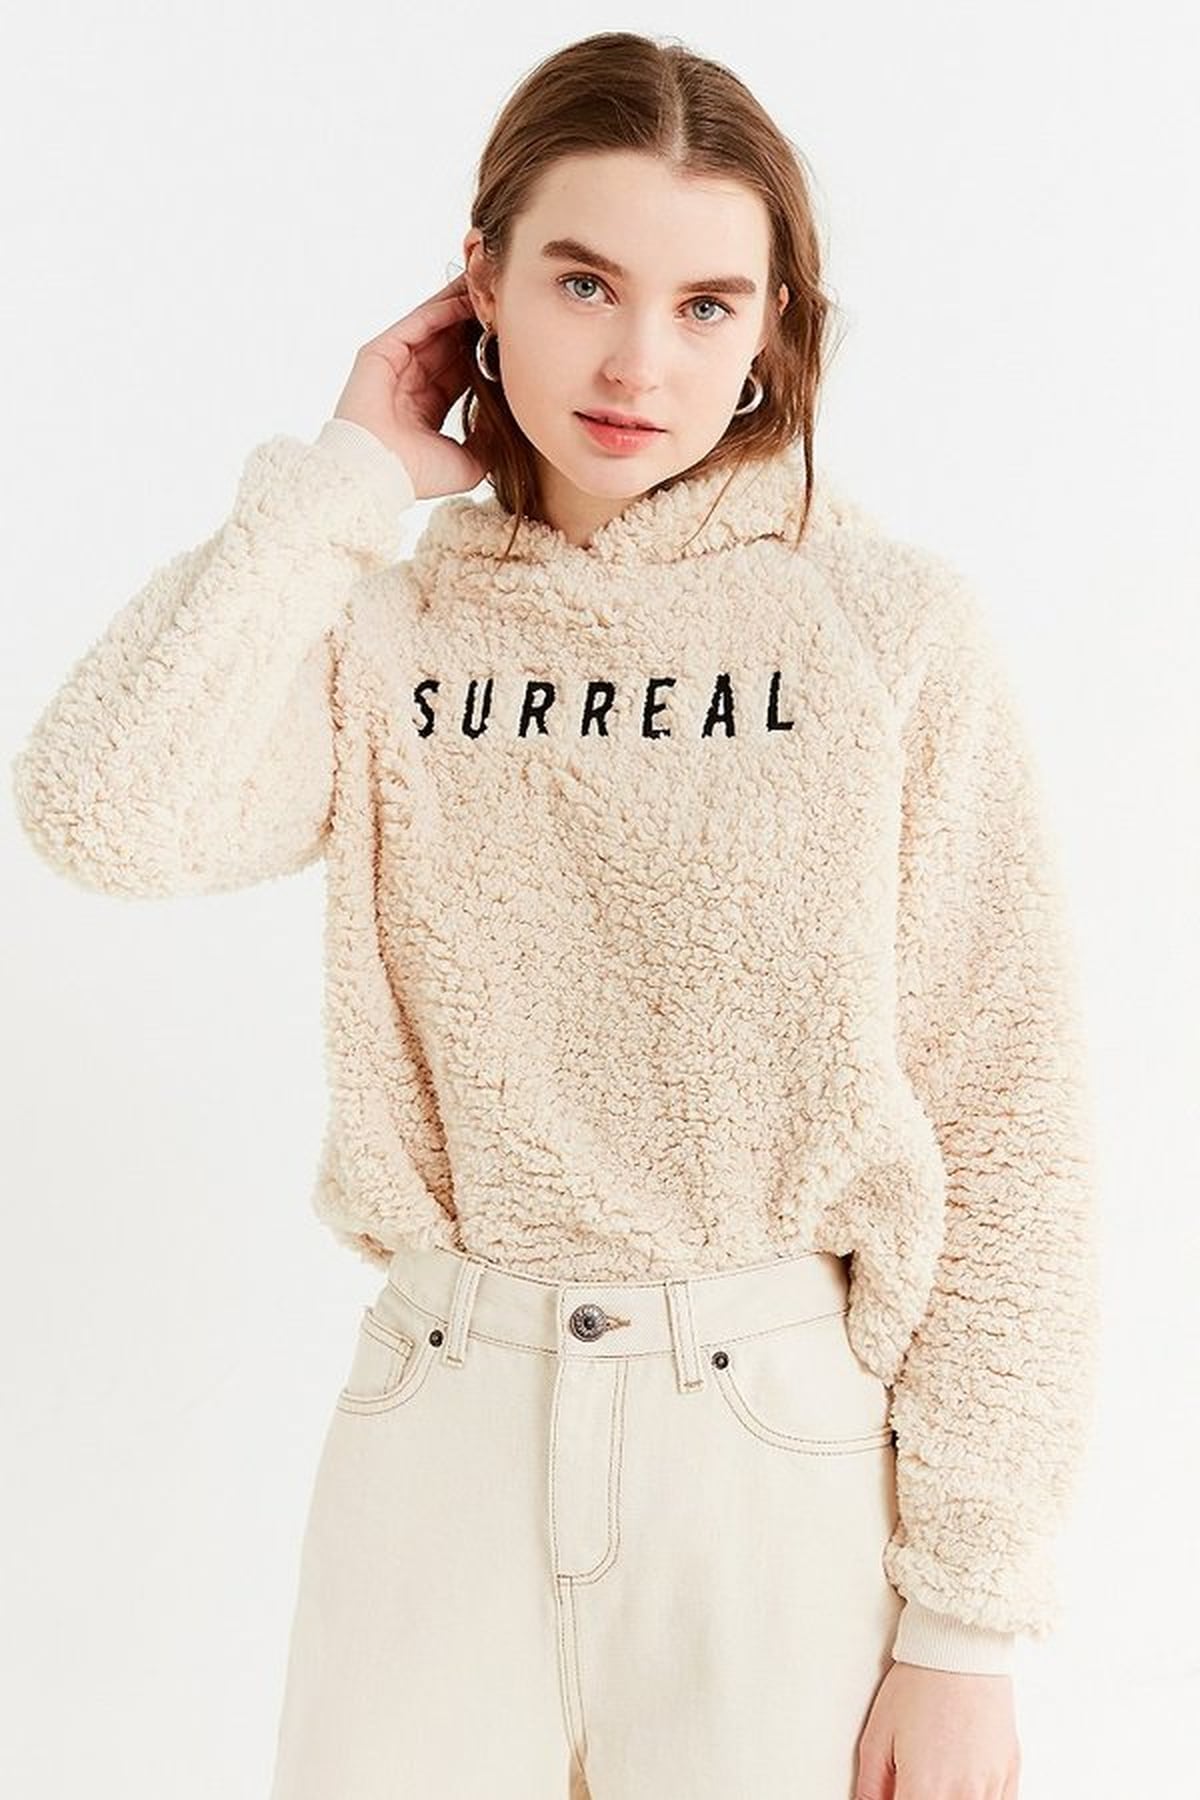 Winter Clothes at Urban Outfitters | POPSUGAR Fashion